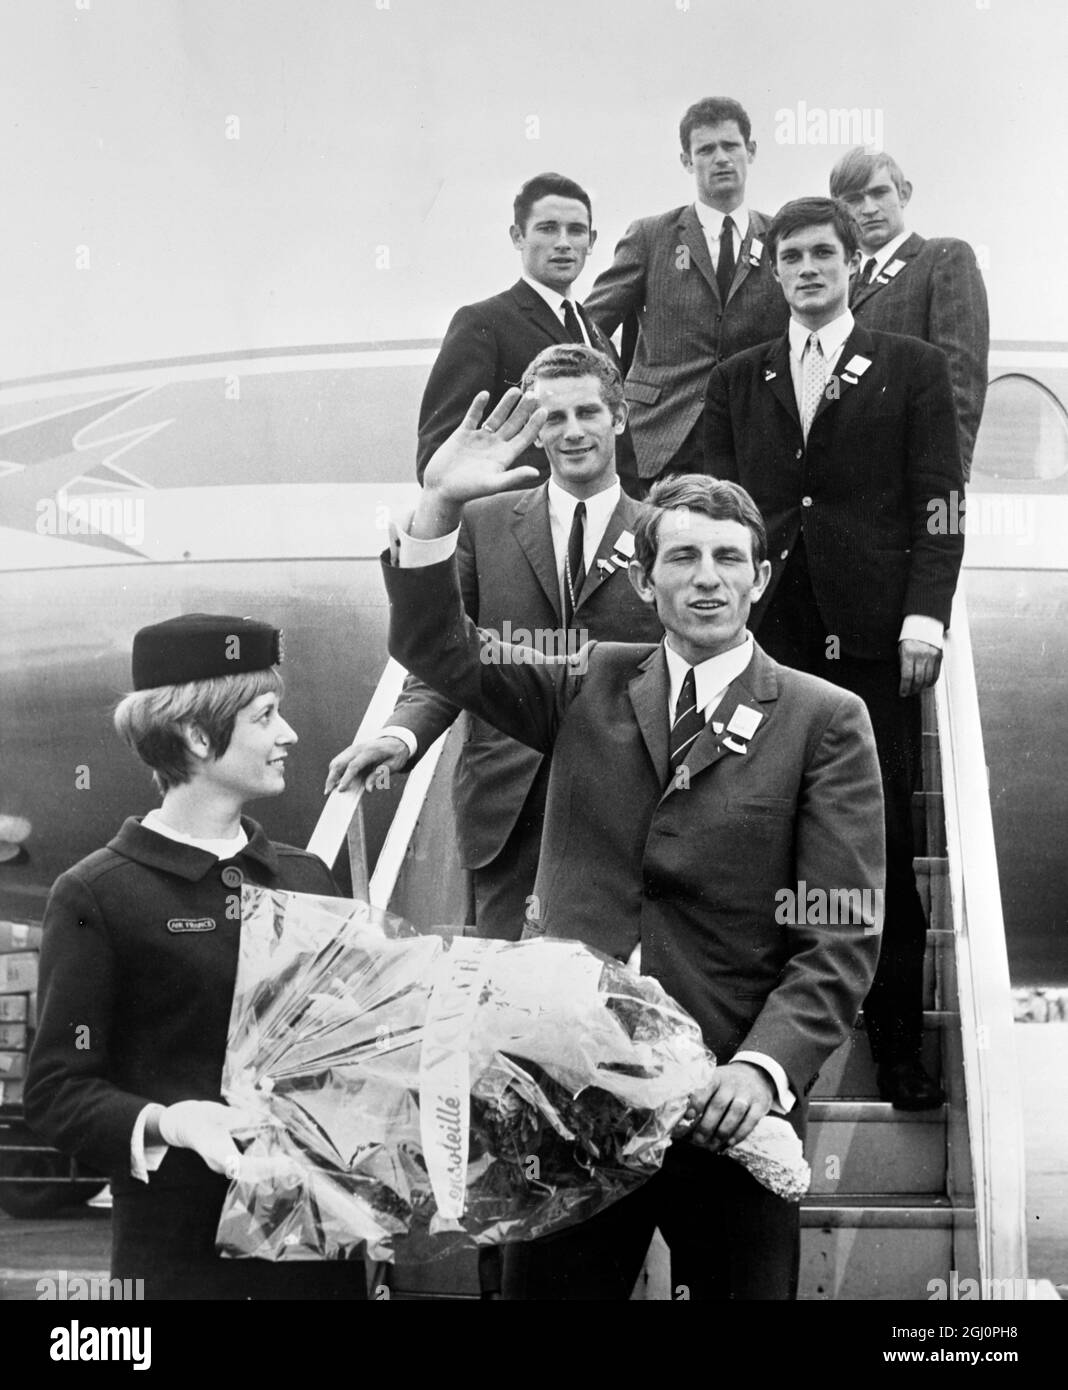 Paris : Jean Pierre Danguillaume receives a traditional bunch of welcoming flowers from an Air France hostess as he and members of his team arrived at Orly Airpot 28 May 1969 following their victory in the 22nd International Peace Race , the most famous cycling race to be held in the Eastern European countries . Stock Photo